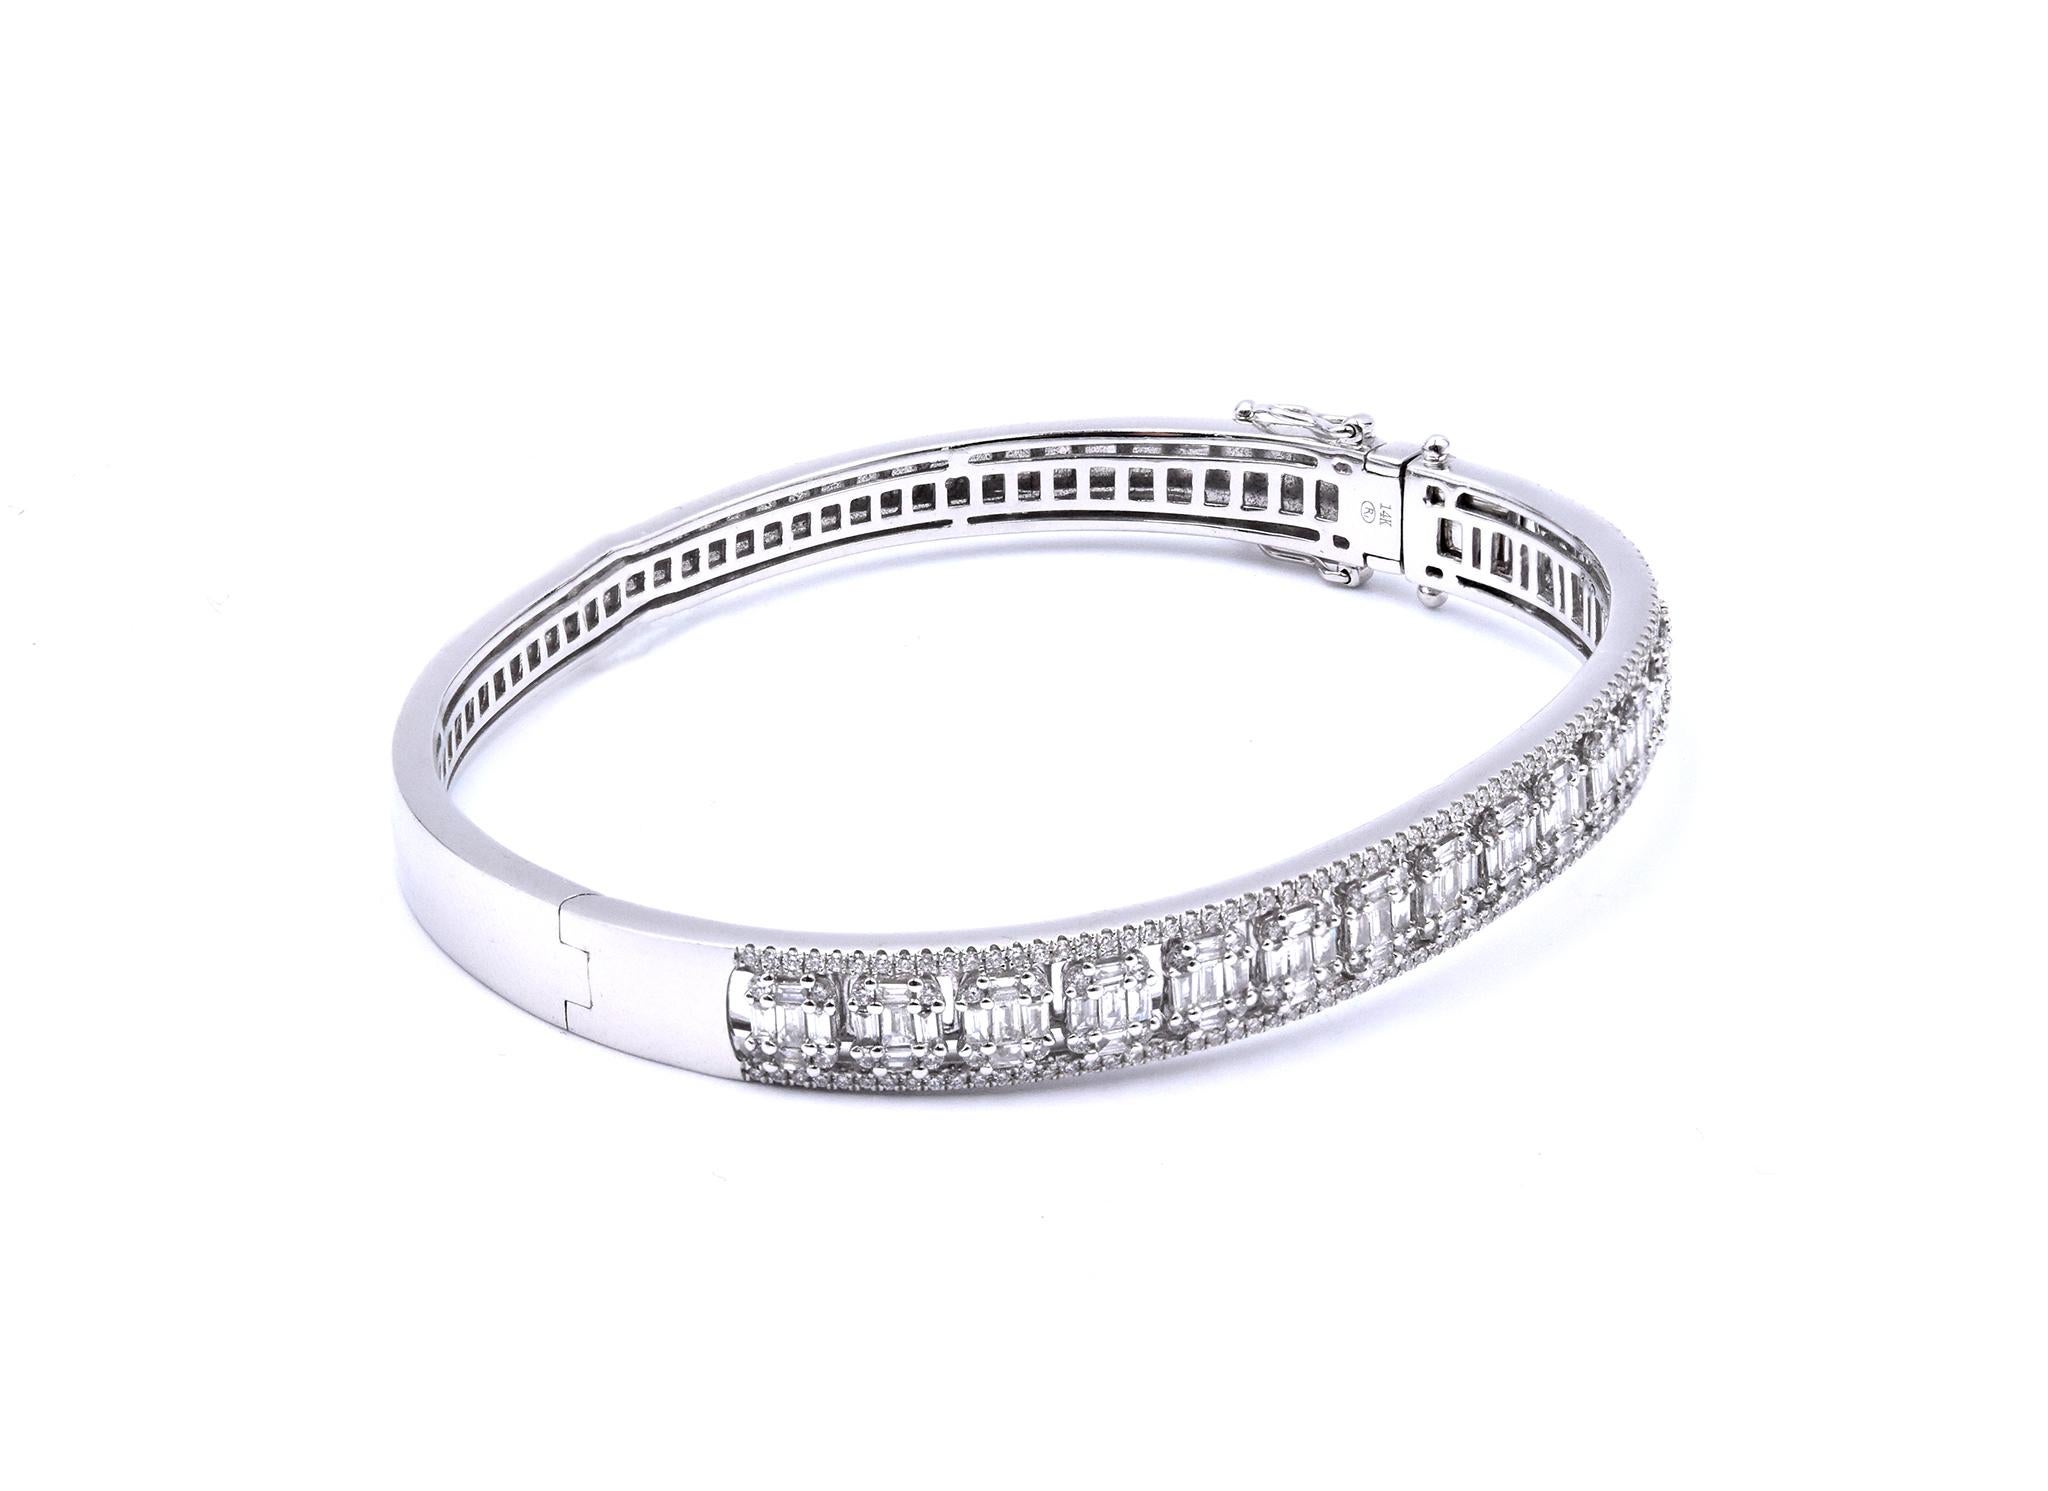 Material: 14K White Gold
Diamonds: 85 baguette cut = .79cttw
Color: G
Clarity: VS
Diamonds: 228 round cut = .64cttw
Color: G
Clarity: VS
Dimensions: bracelet will fit up to a 7-inch wrist
Weight: 17.37 grams
